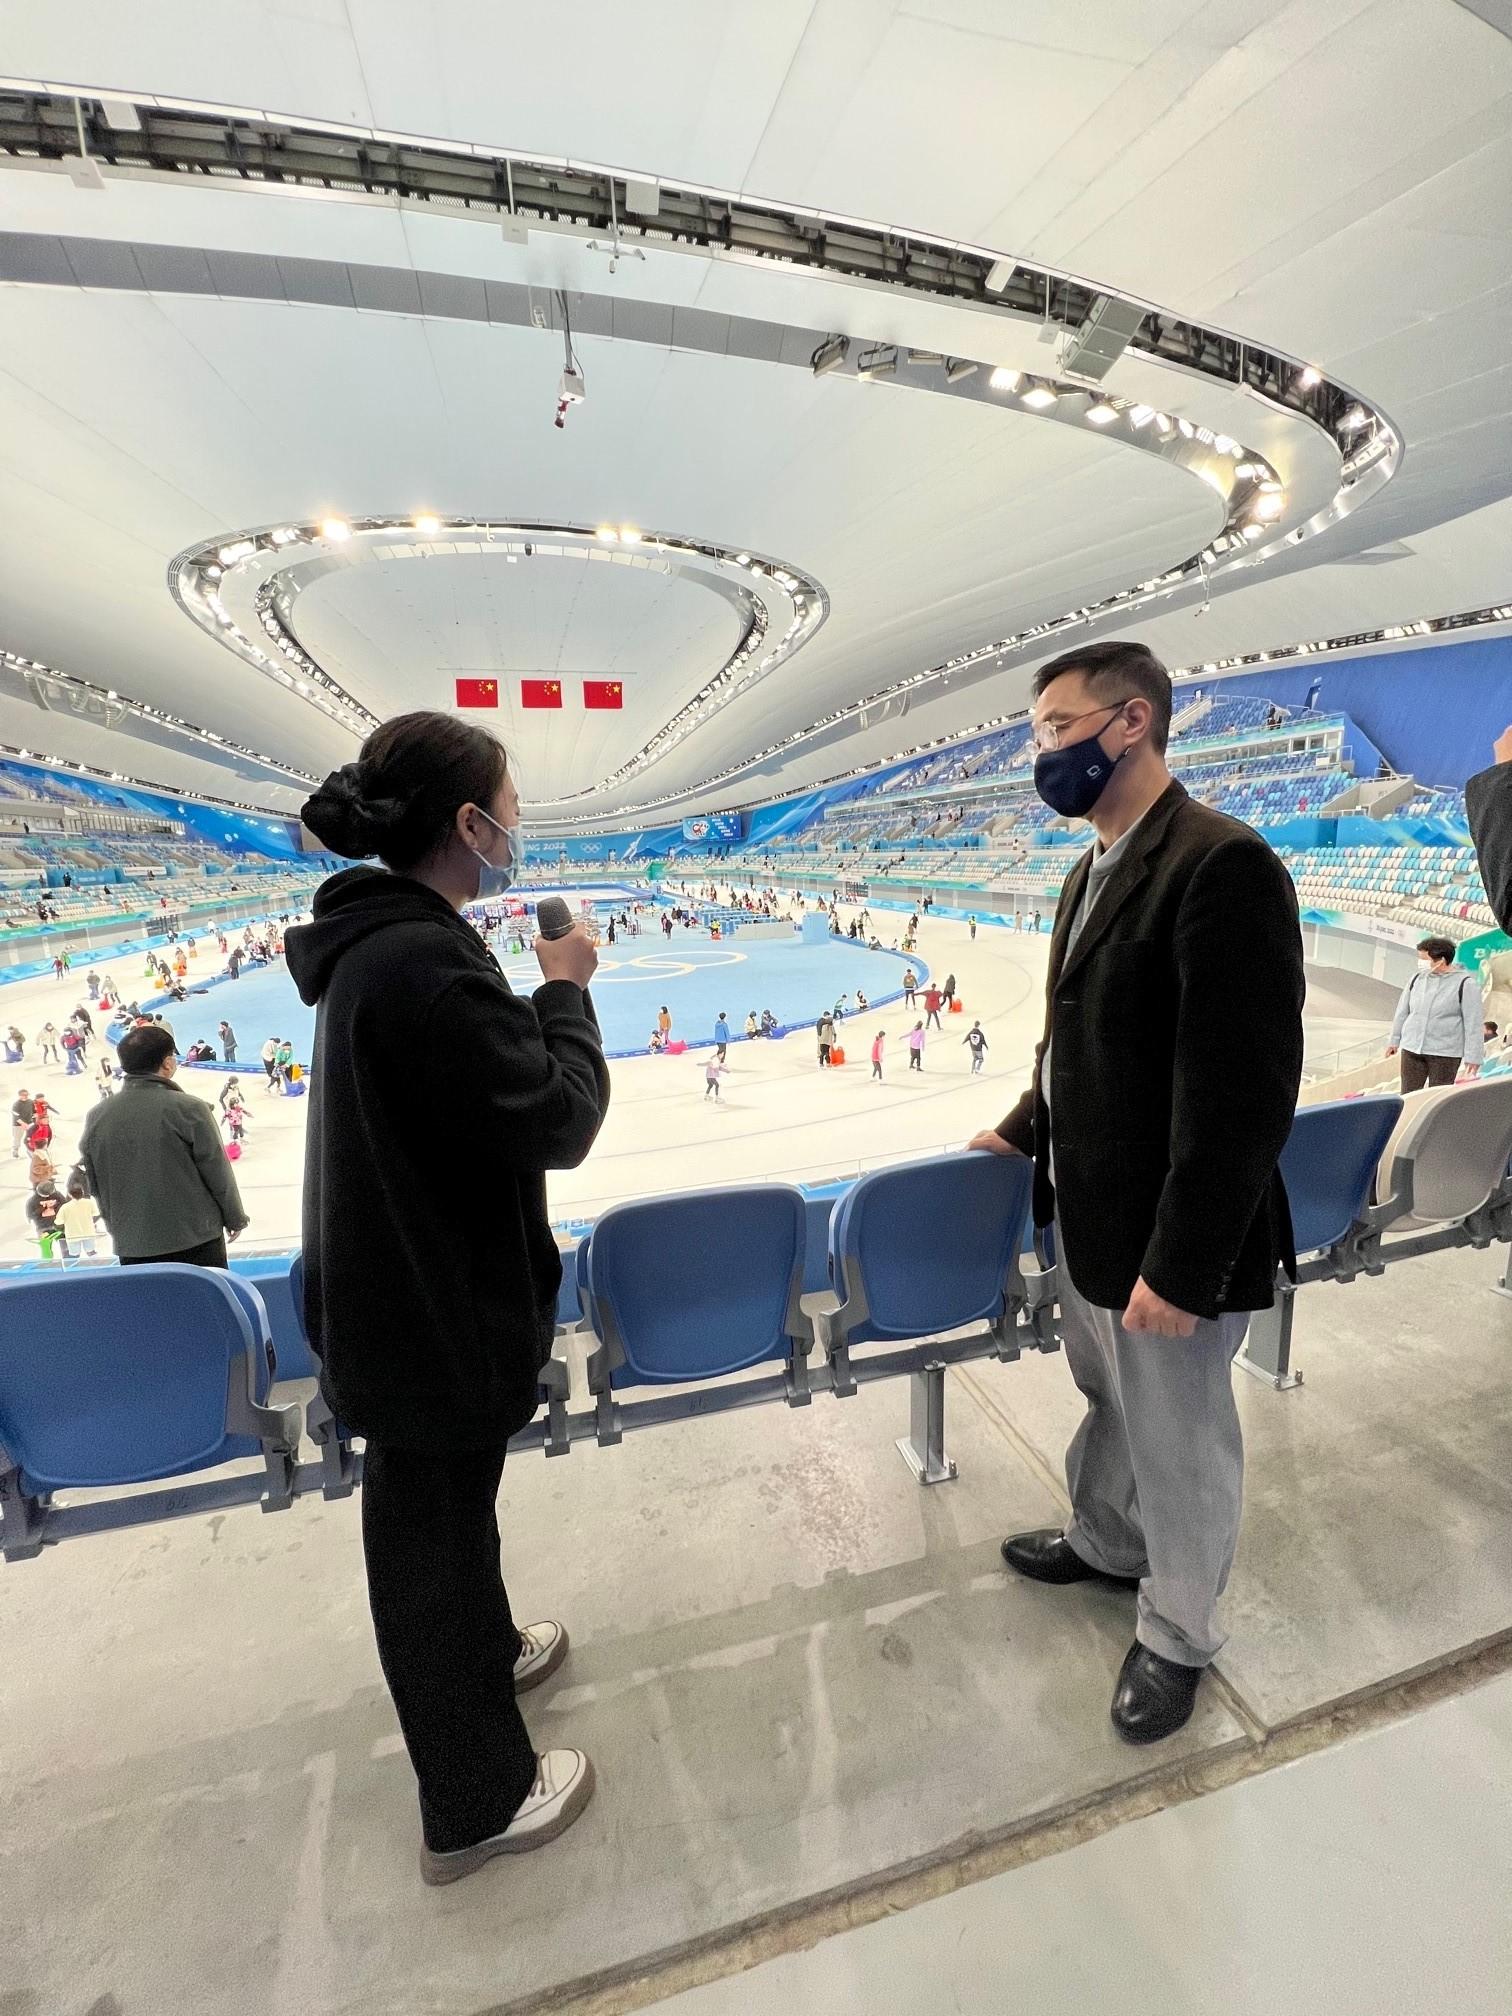 The Secretary for Culture, Sports and Tourism, Mr Kevin Yeung (right), yesterday (March 12) is briefed at the National Speed Skating Oval in Beijing.
